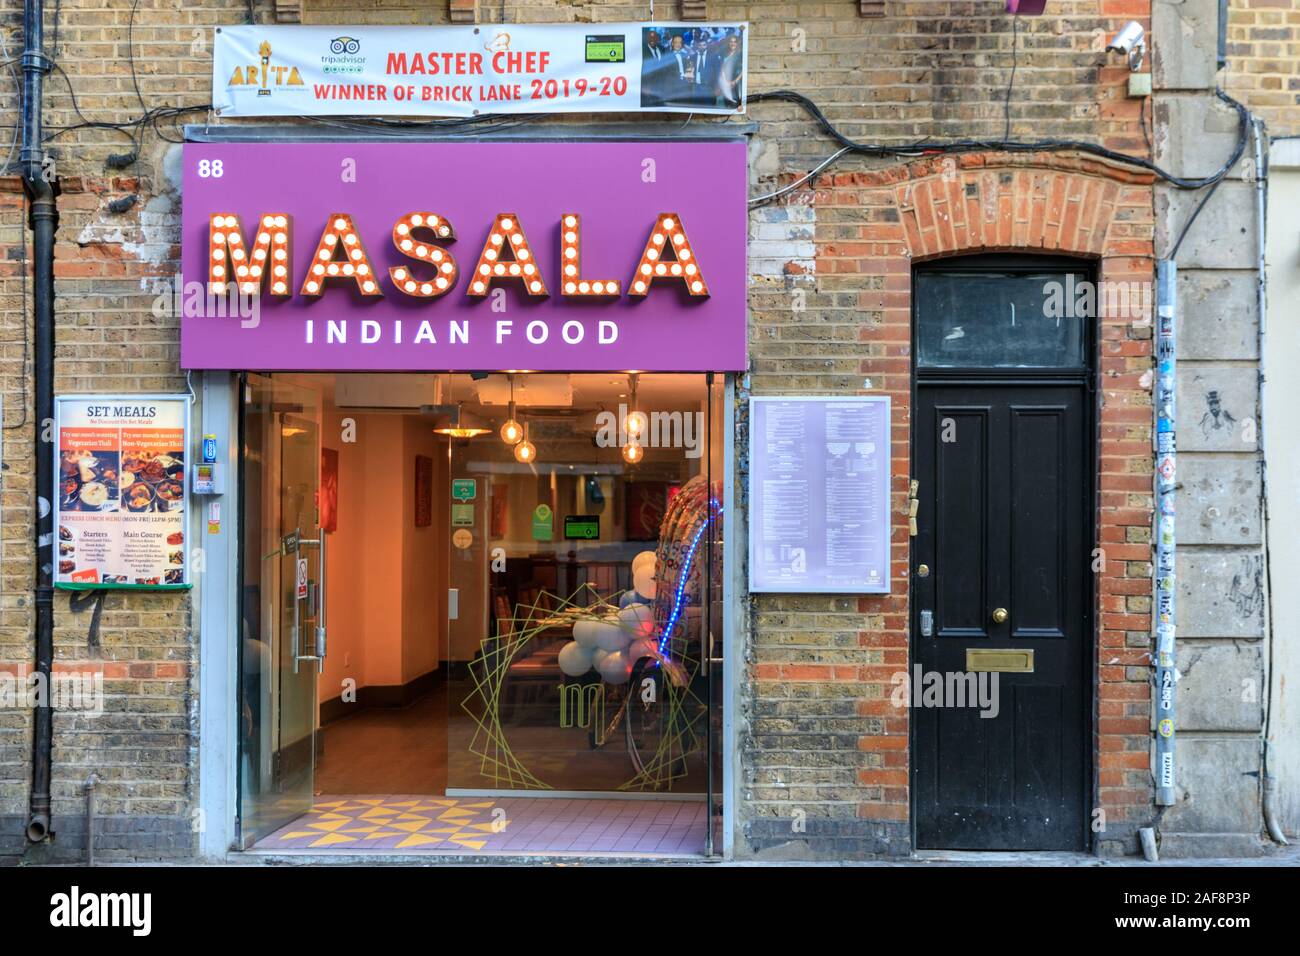 Masala Indian Food Restaurant, Curry House exterior in Brick Lane, Tower Hamlets, East End of London, UK Stock Photo